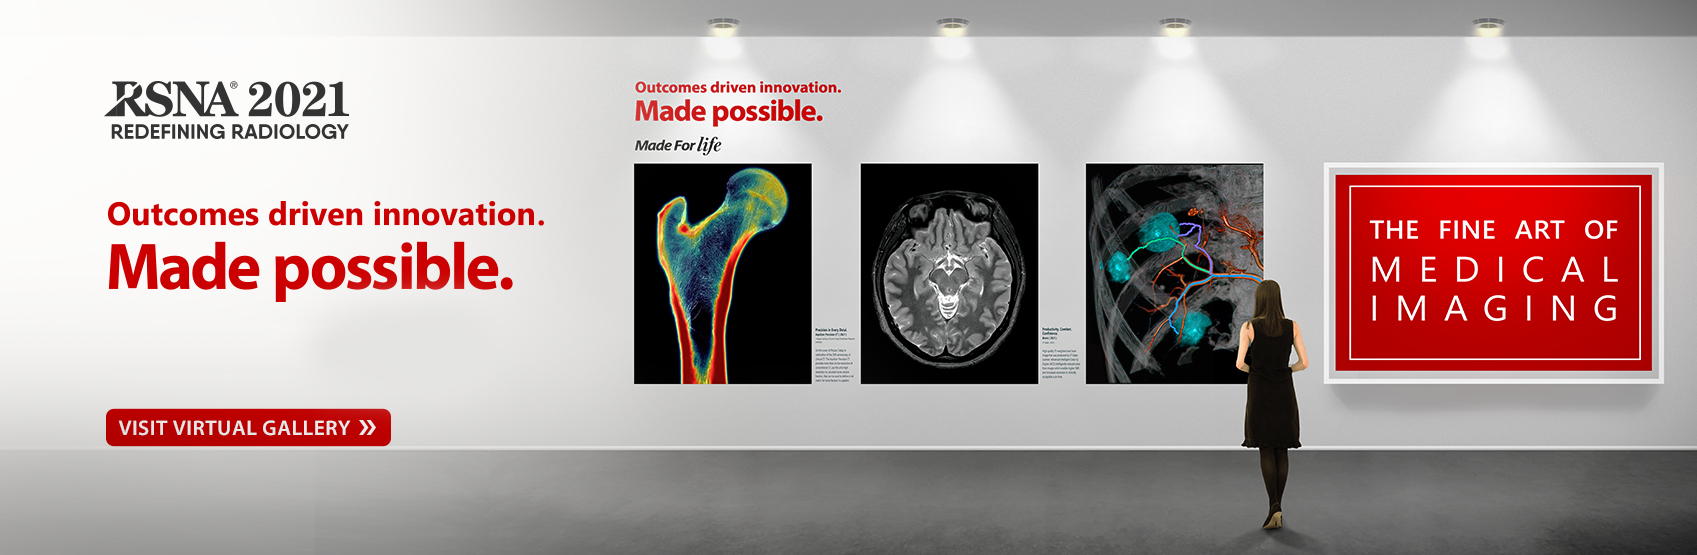 RSNA 2021 | Outcomes driven innovation. Made Possible. | Visit Virtual Gallery